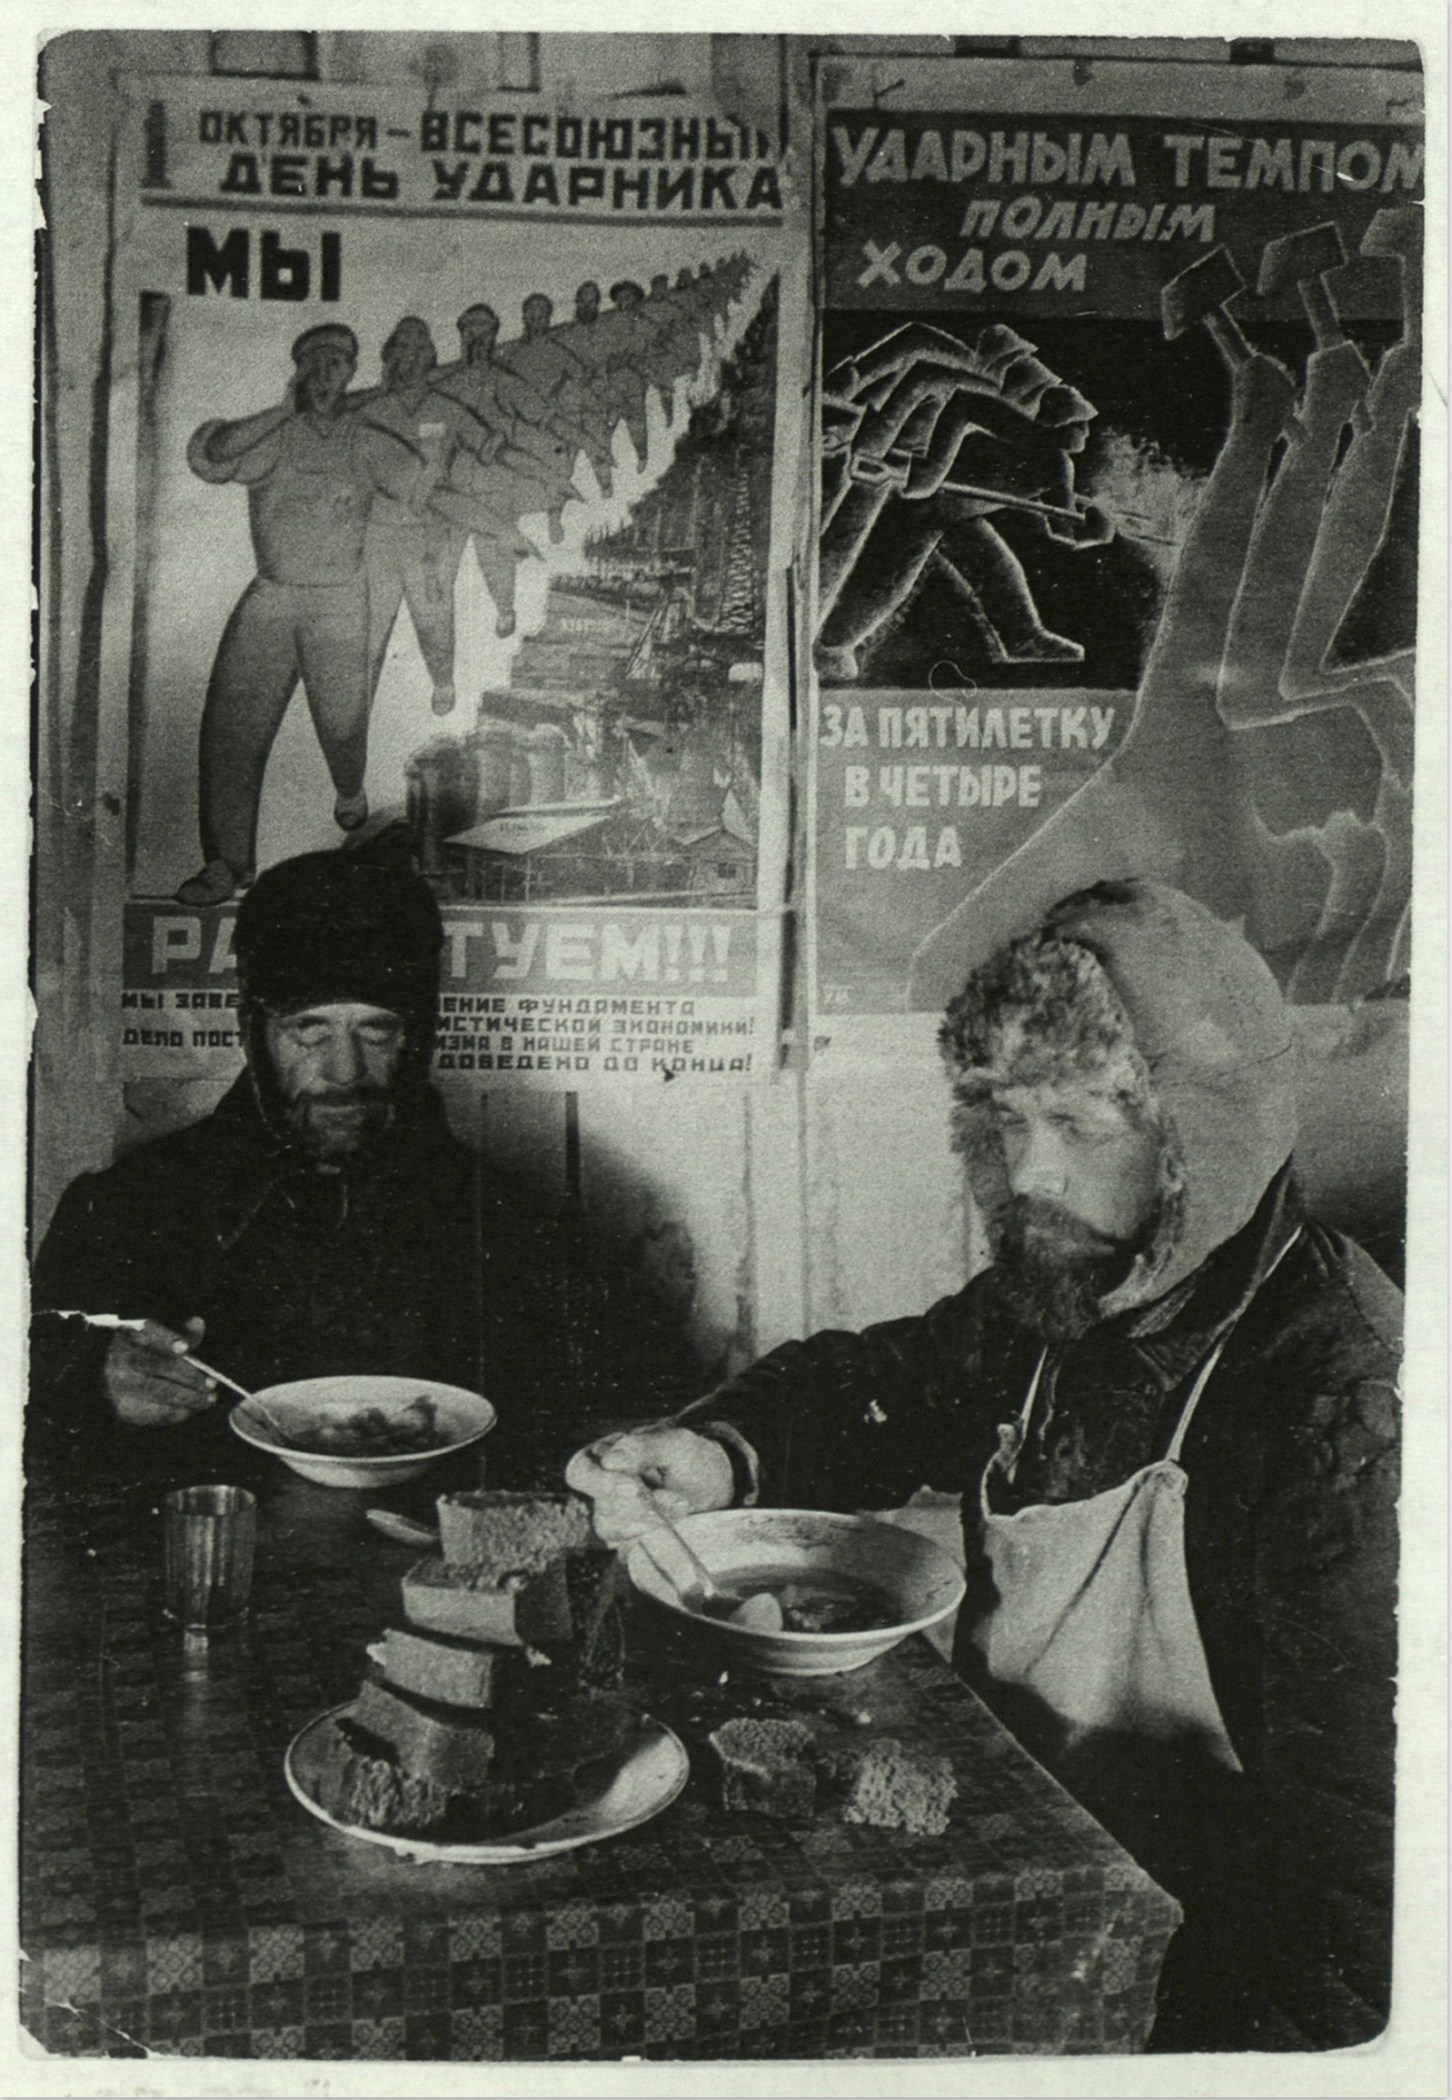 margaret-bourke-white-two-russian-workers-eating-black-bread-and-soup-at-a-table-in-front-of-a-wall-covered-with-soviet-communist-workers-posters-in-siberia-magnitogorsk-1931.jpeg